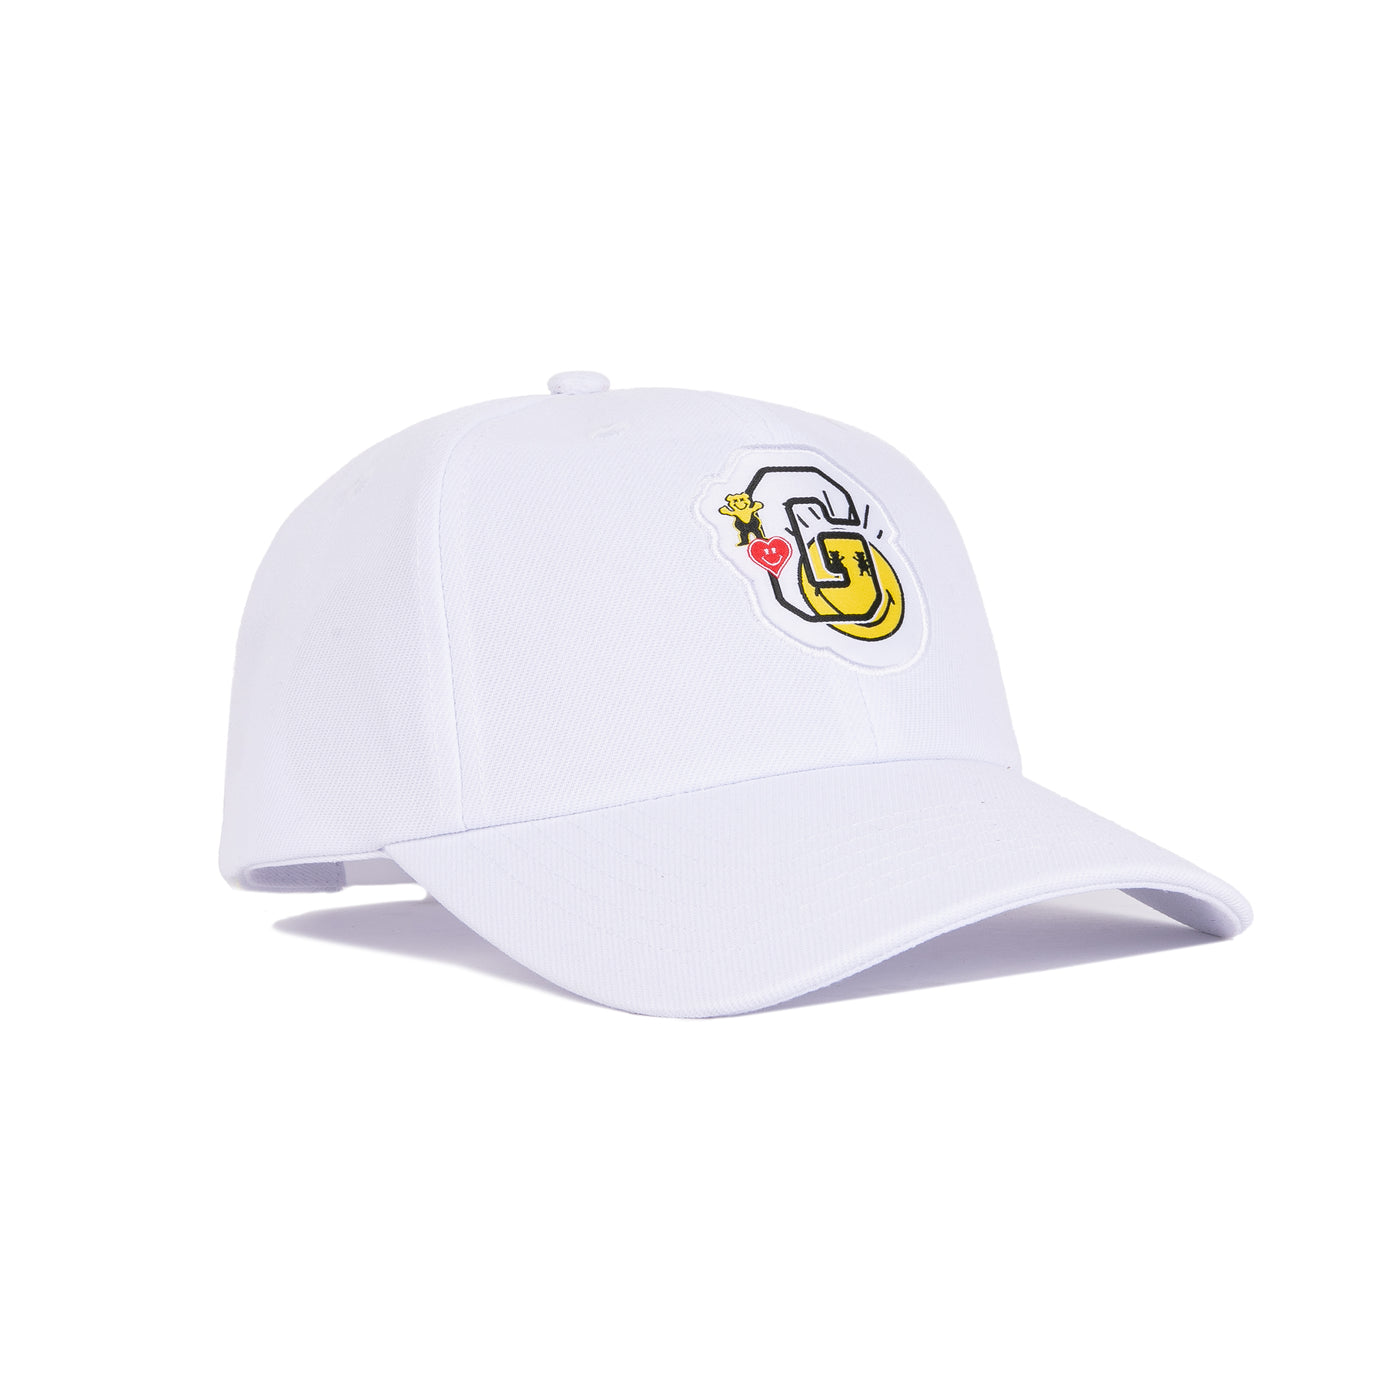 SMILEYWORLD Grizzly x Smiley World Dad Hat - White